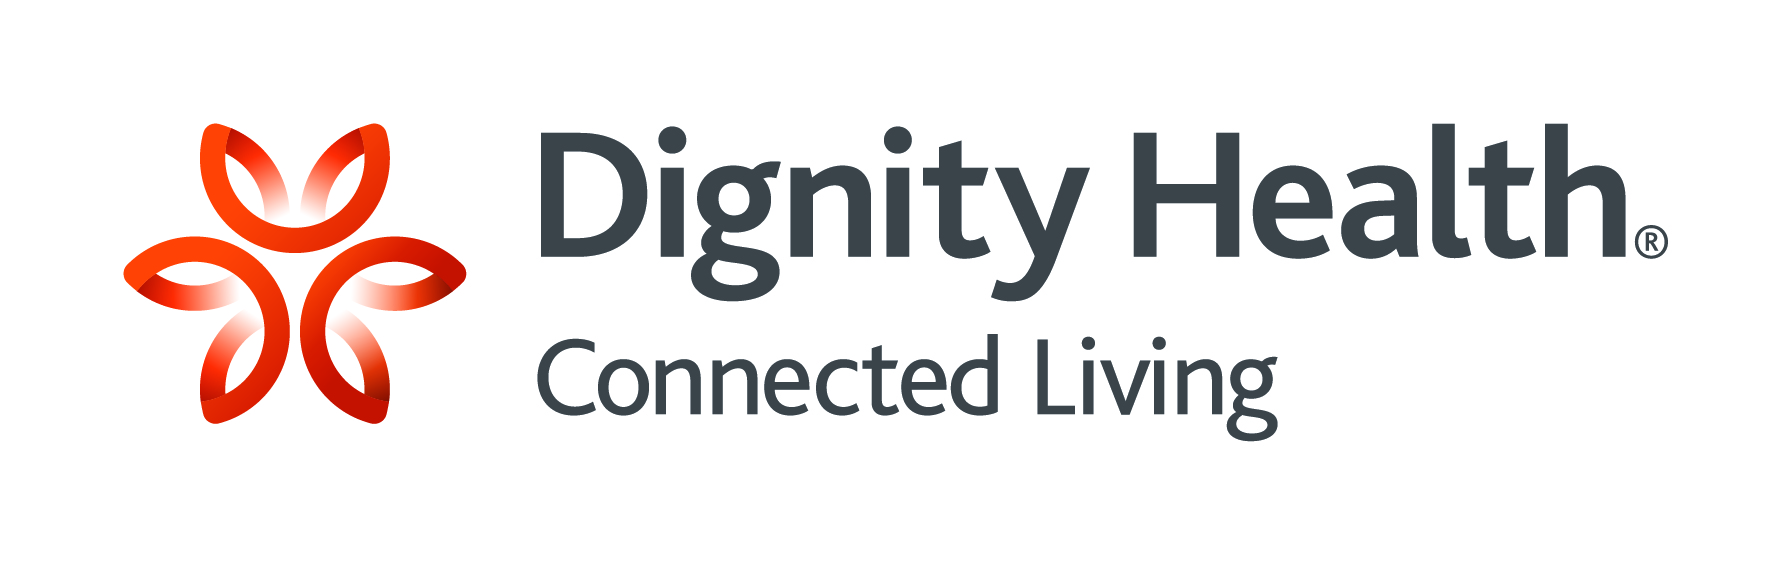 PLATINUM- Dignity Health Connected Living (1).jpg